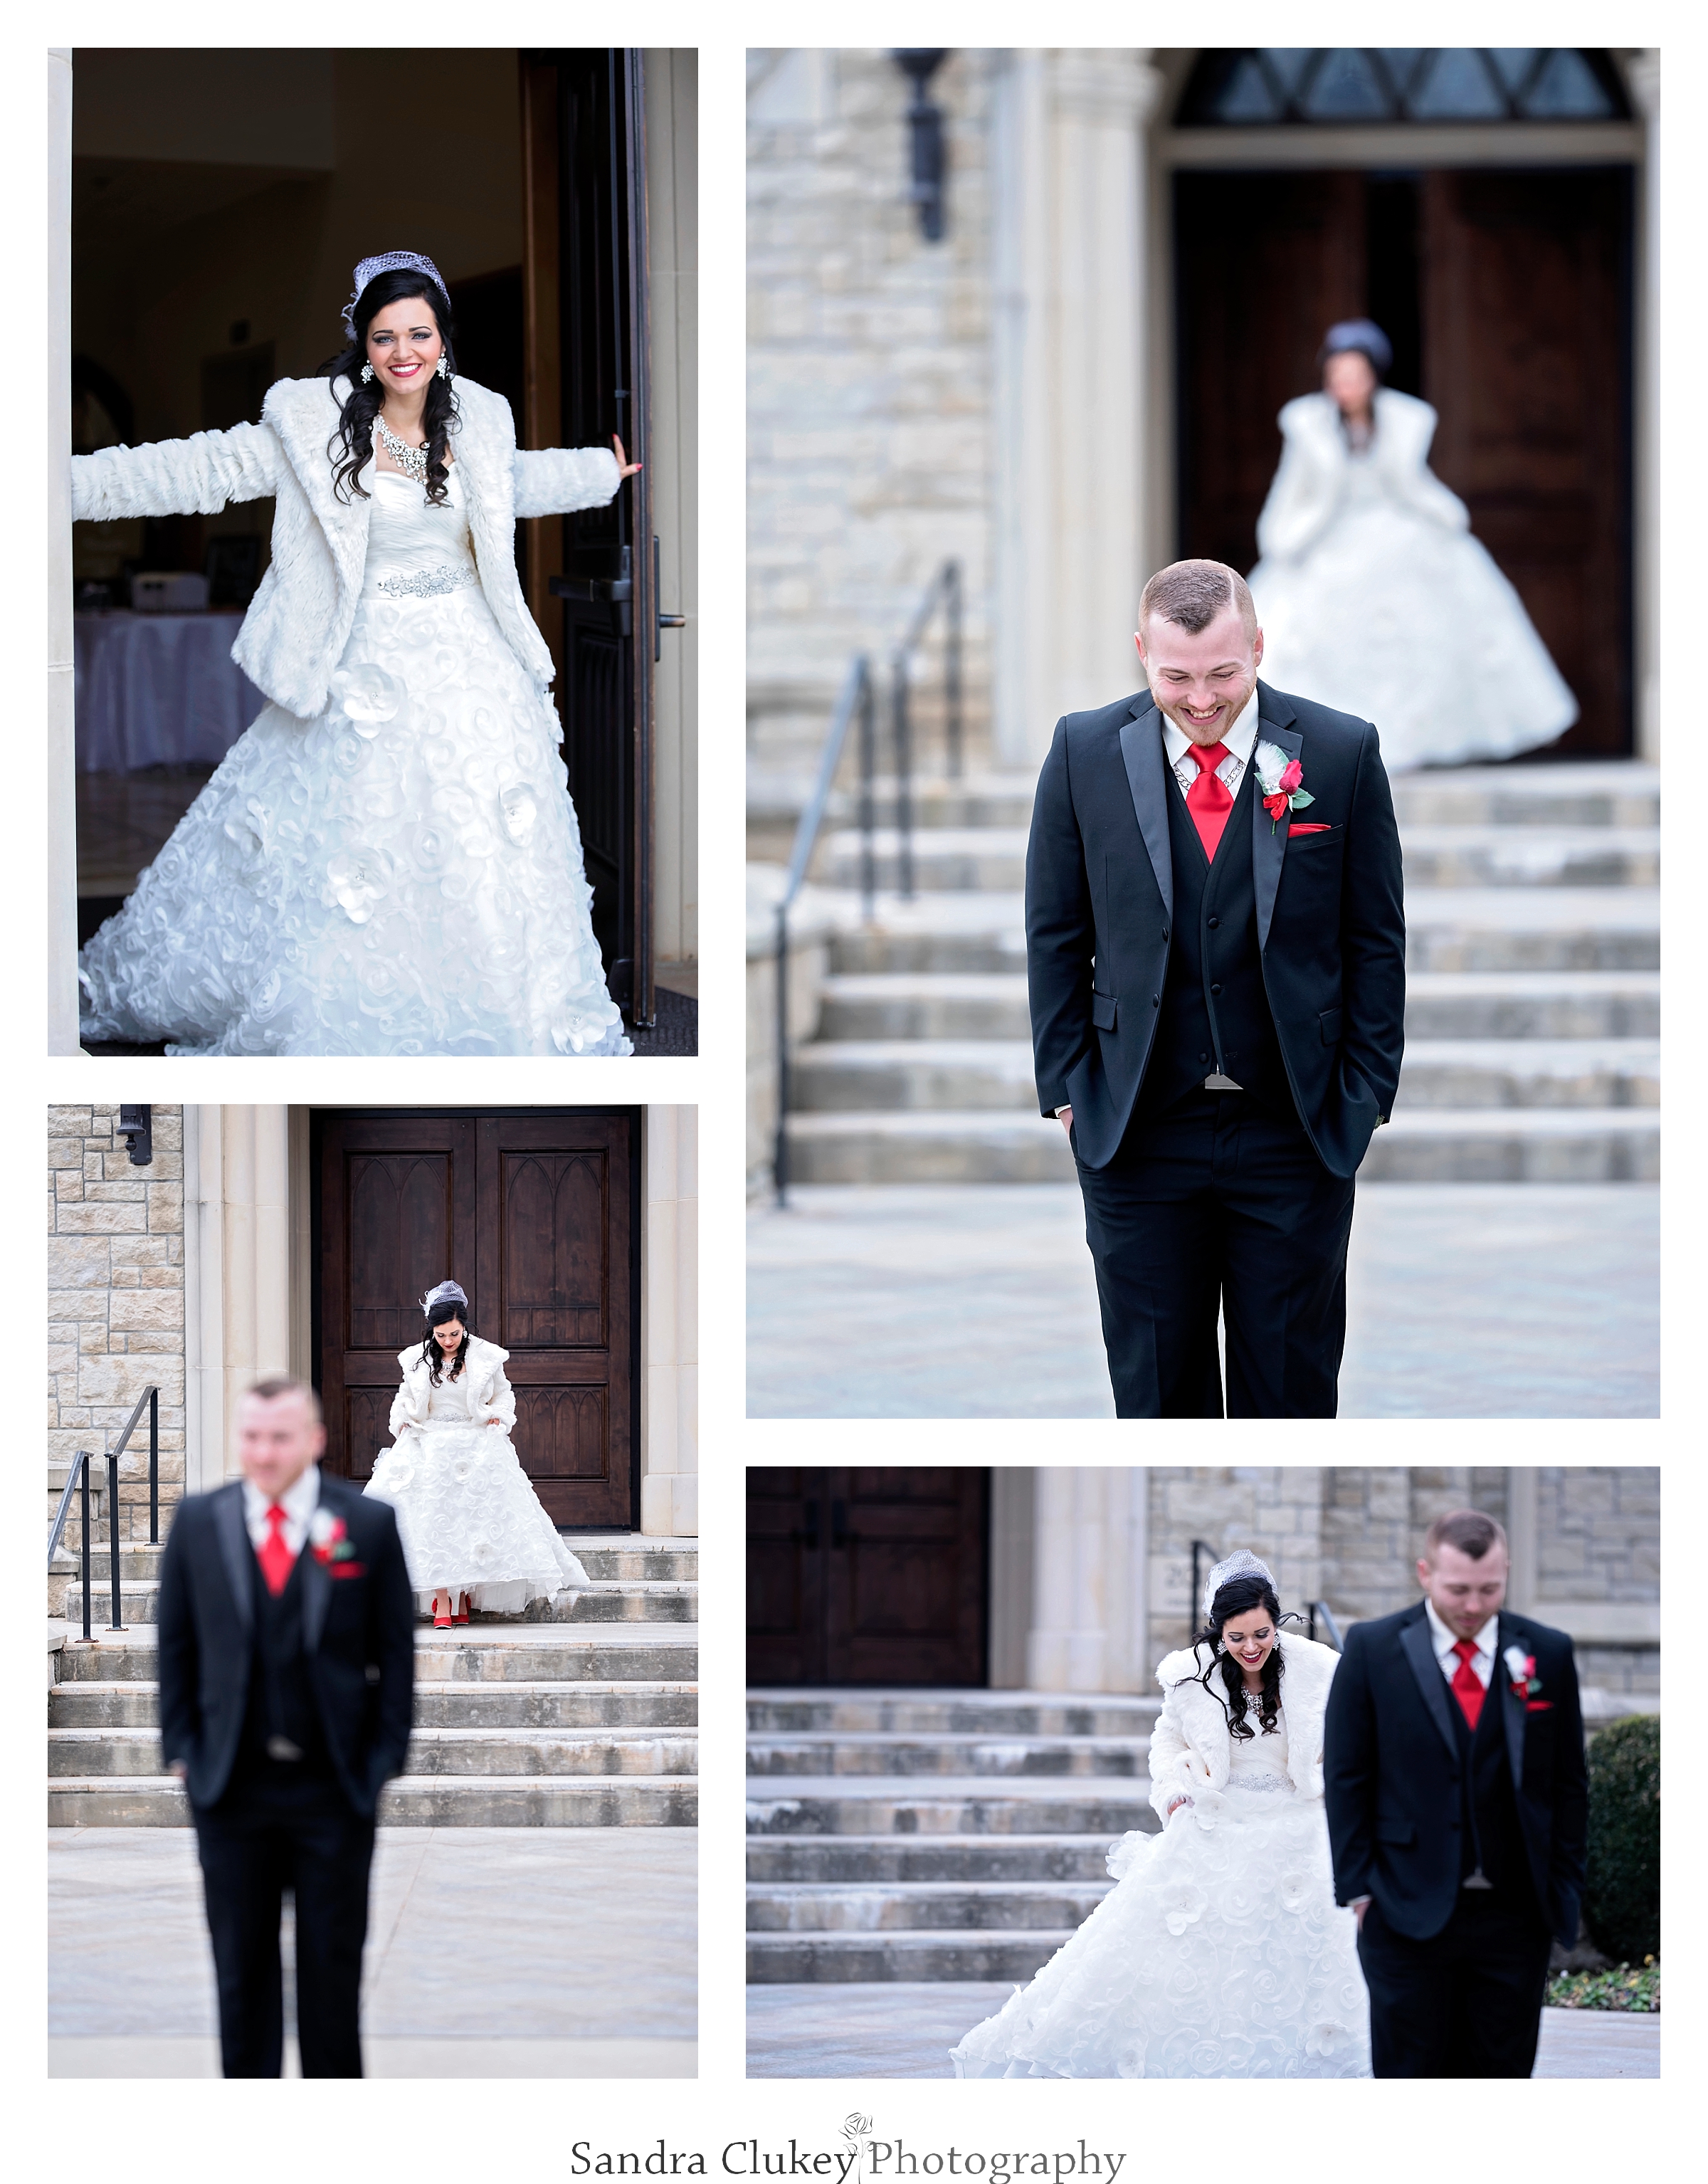 Wedding day first look with bride and groom at Lee University Chapel, Cleveland TN